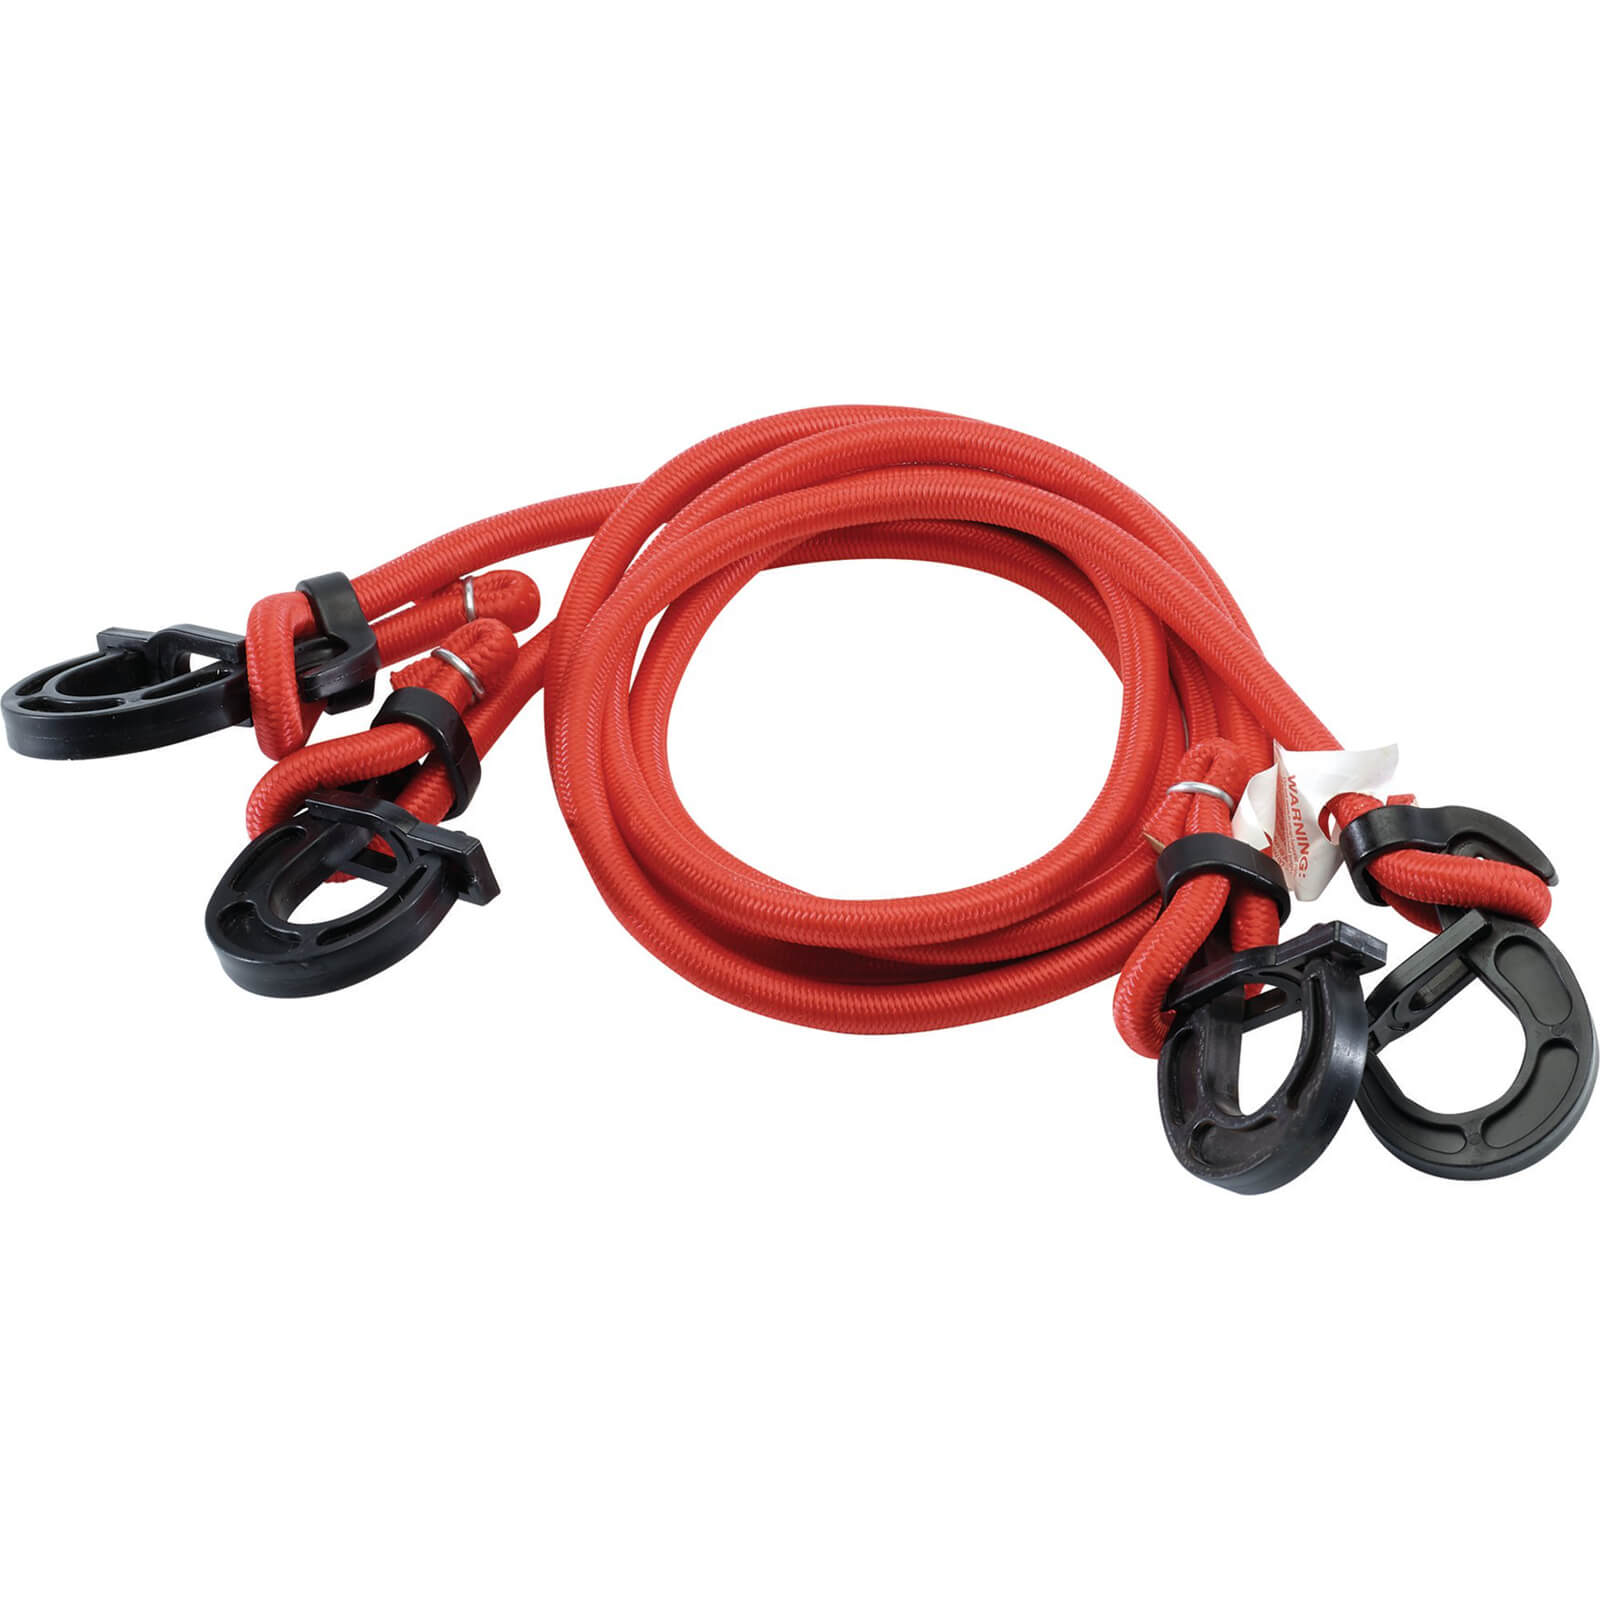 Twin Wire Bungee Cord 60cm Red 2 Piece MLK3020E 